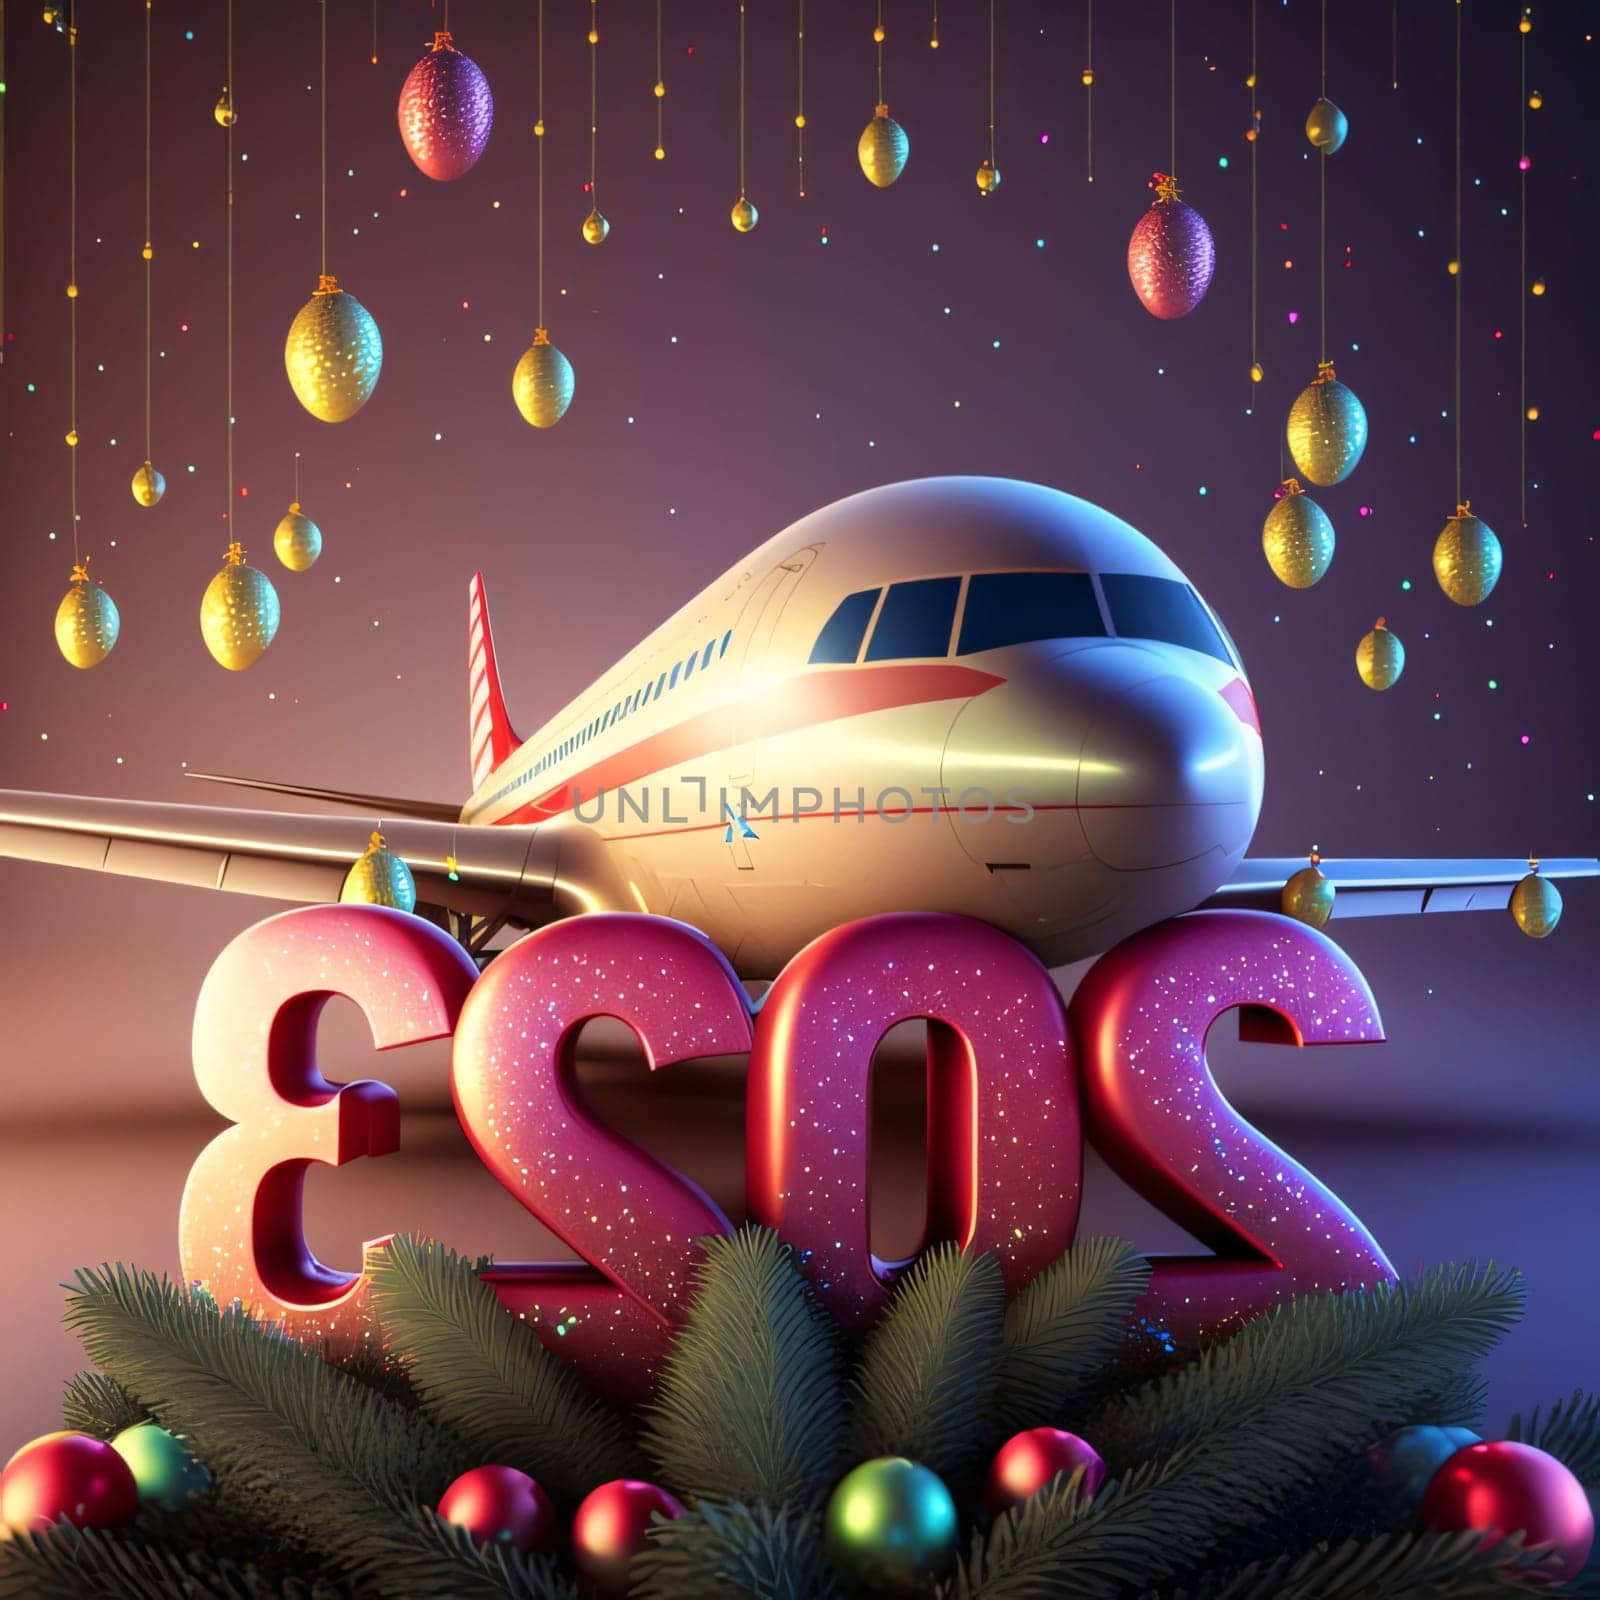 3D illustration of New Year's Eve with airplane and Christmas decorations by ThemesS